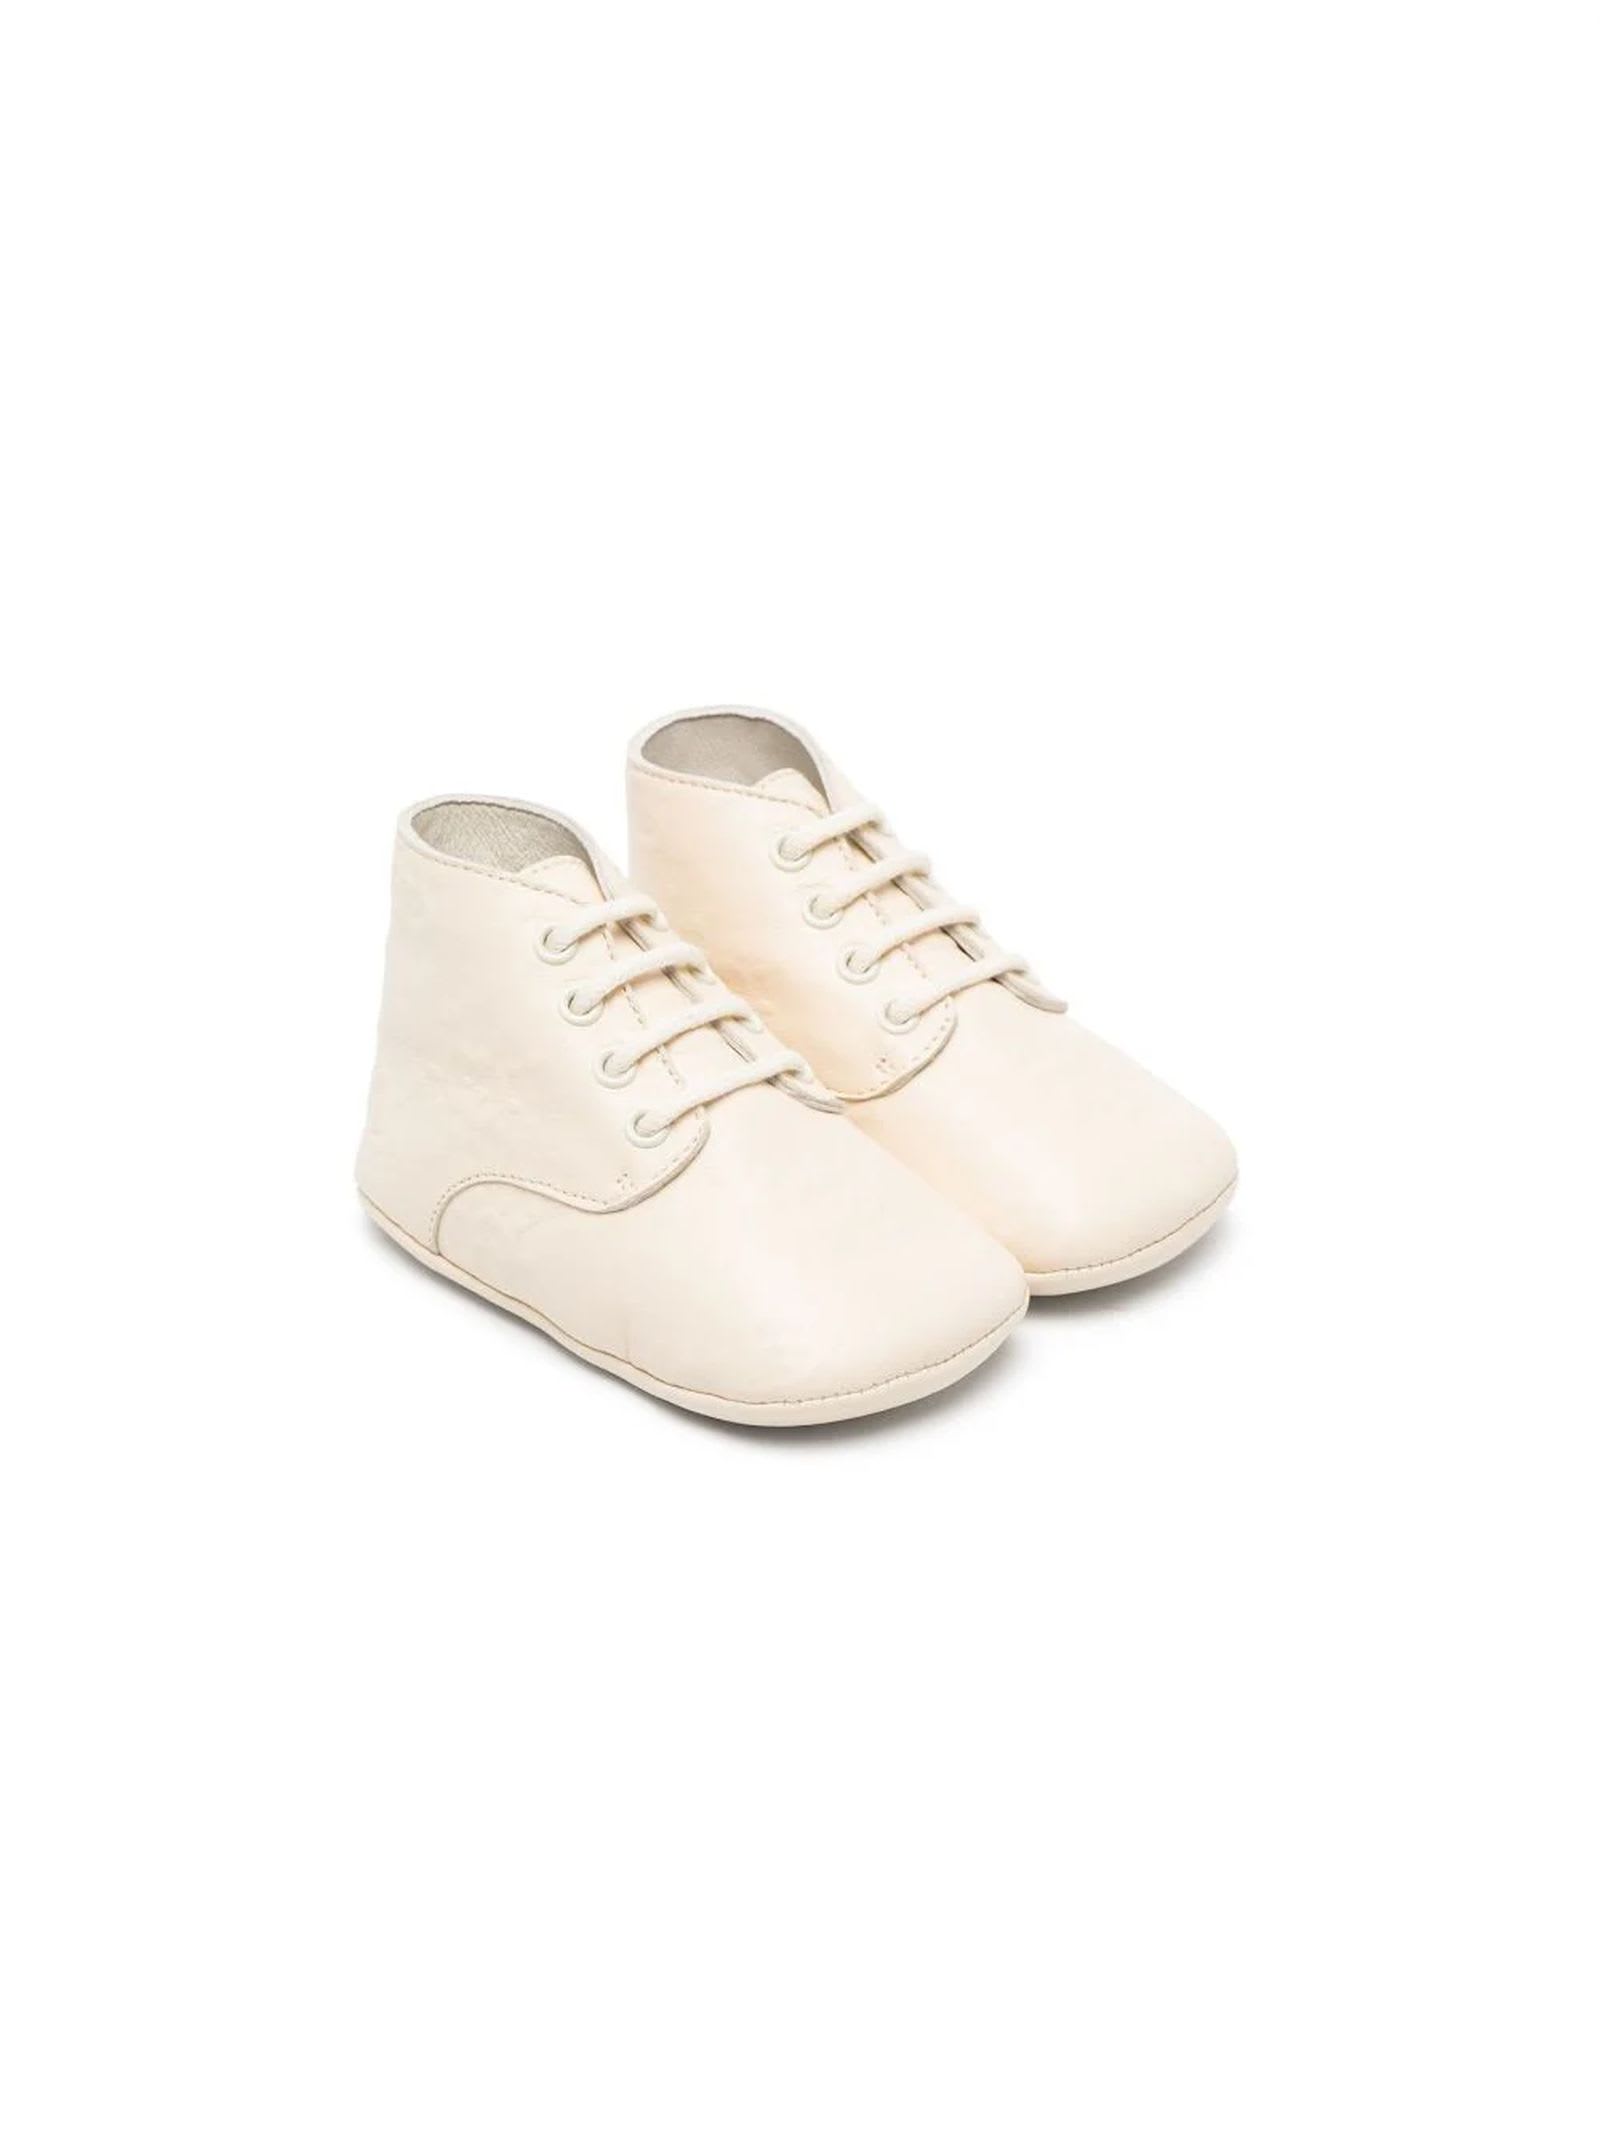 GUCCI IVORY WHITE CALF LEATHER SHOES